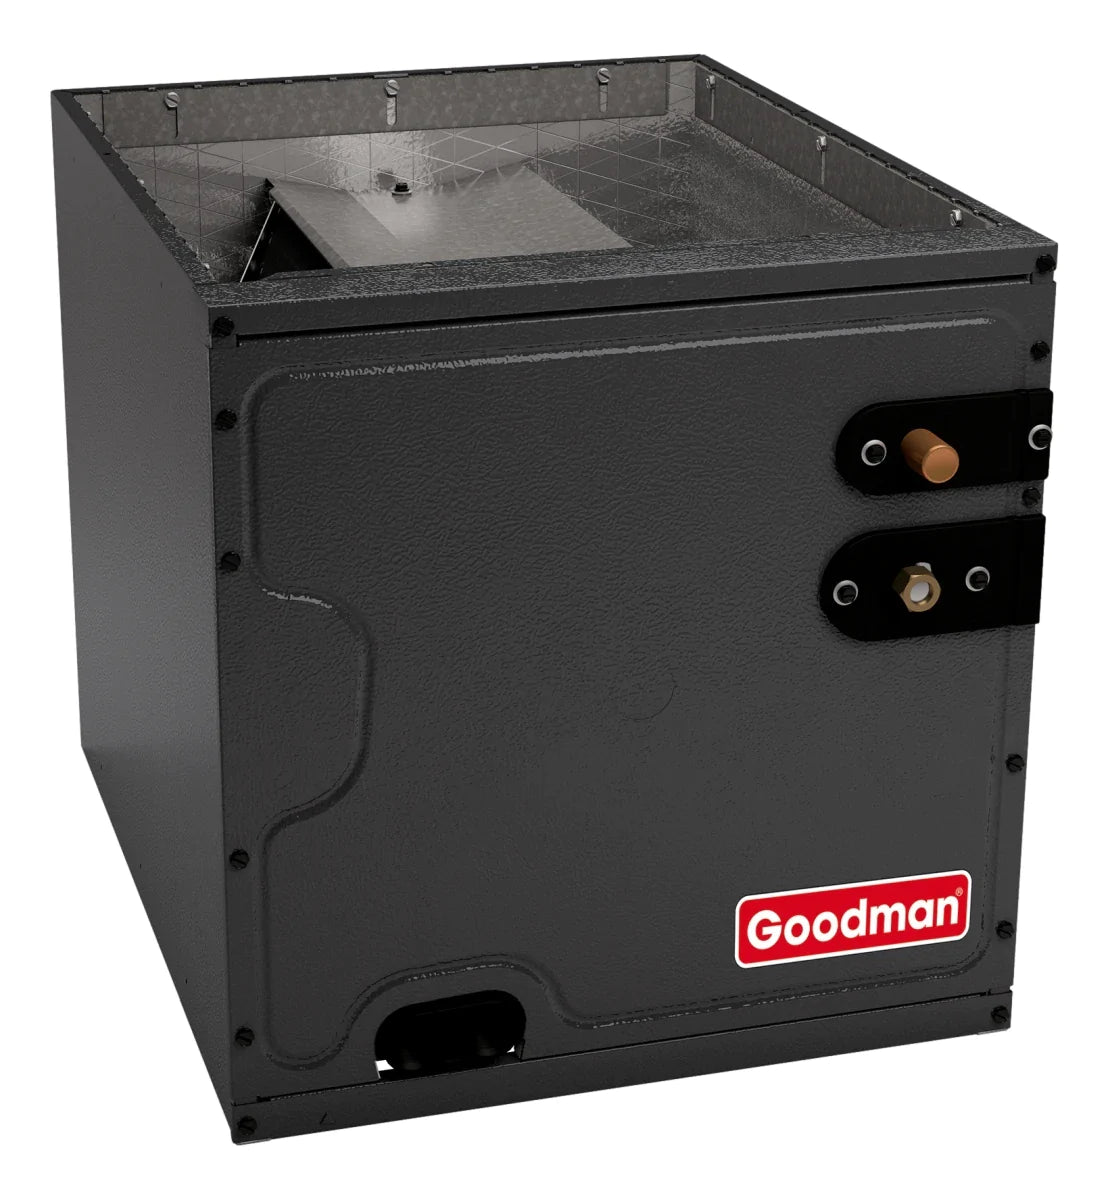 Goodman 1.5 TON 14.5 SEER2 Upflow Heat Pump system with 96% AFUE 40k BTU 2 stage Low NOx Furnace (GSZH501810, CAPTA3022A4, GM9C960403AN)